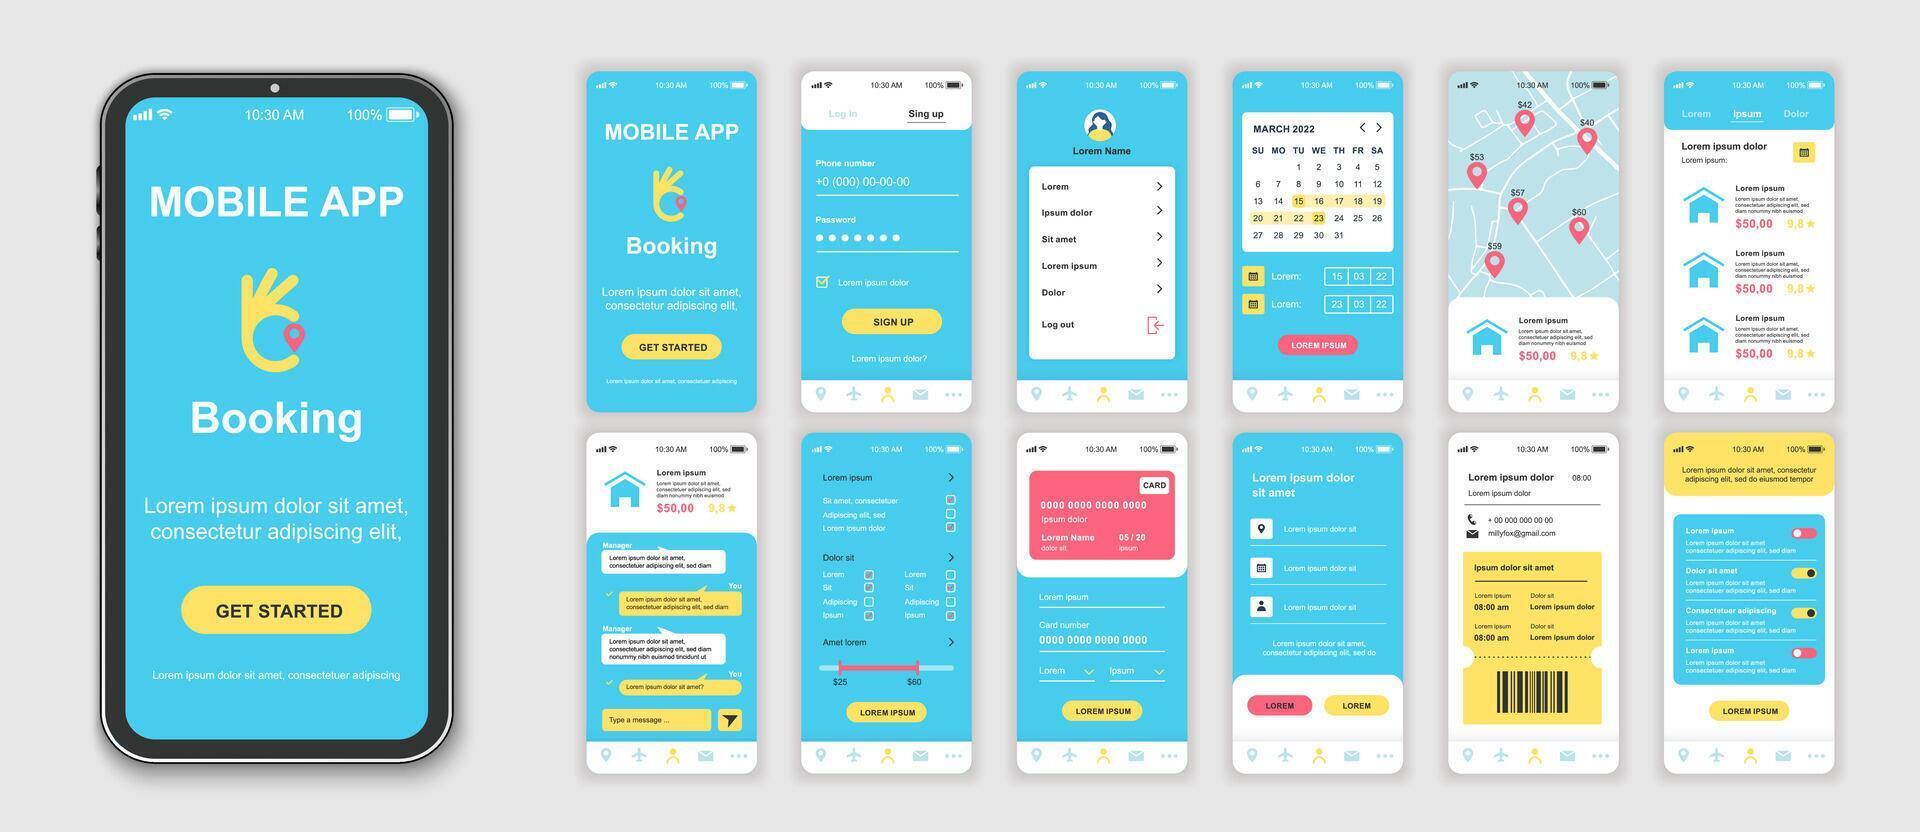 Booking mobile app interface screens template set. Account login, calendar, map locations, searching hotel room, flight ticket order. Pack of UI, UX, GUI kit for application web layout. Vector design.